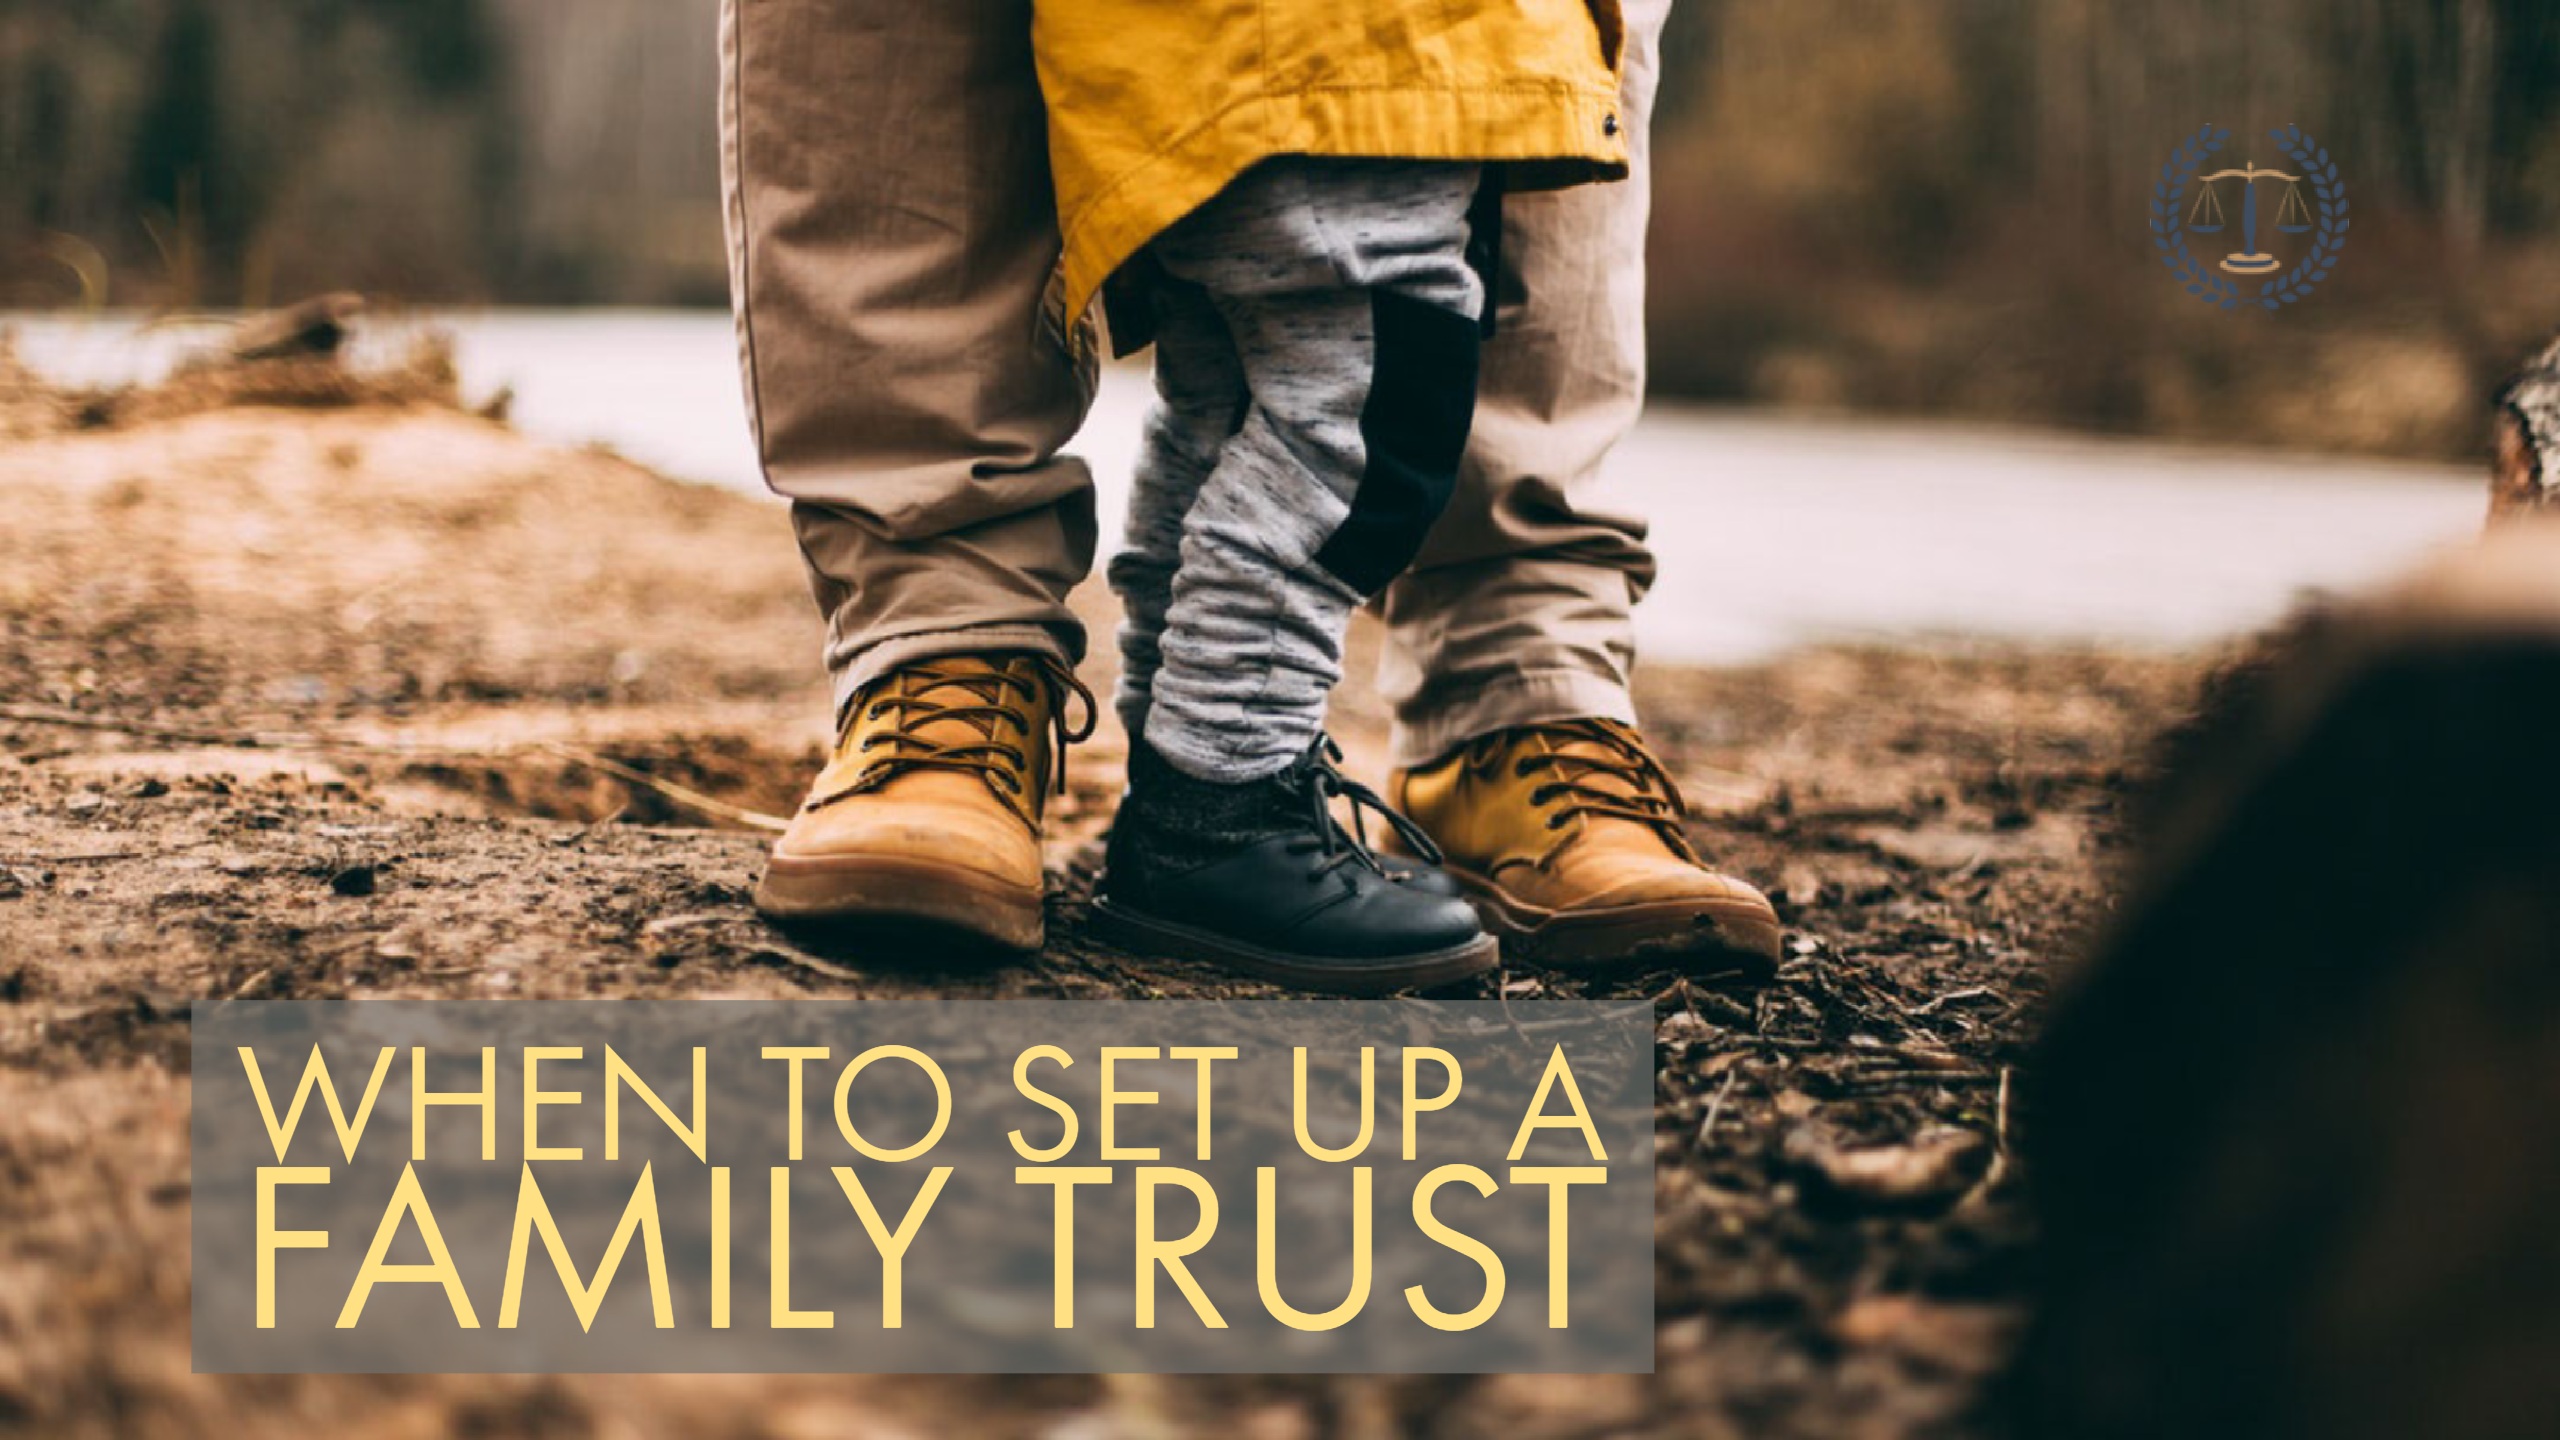 When To Set Up A Family Trust